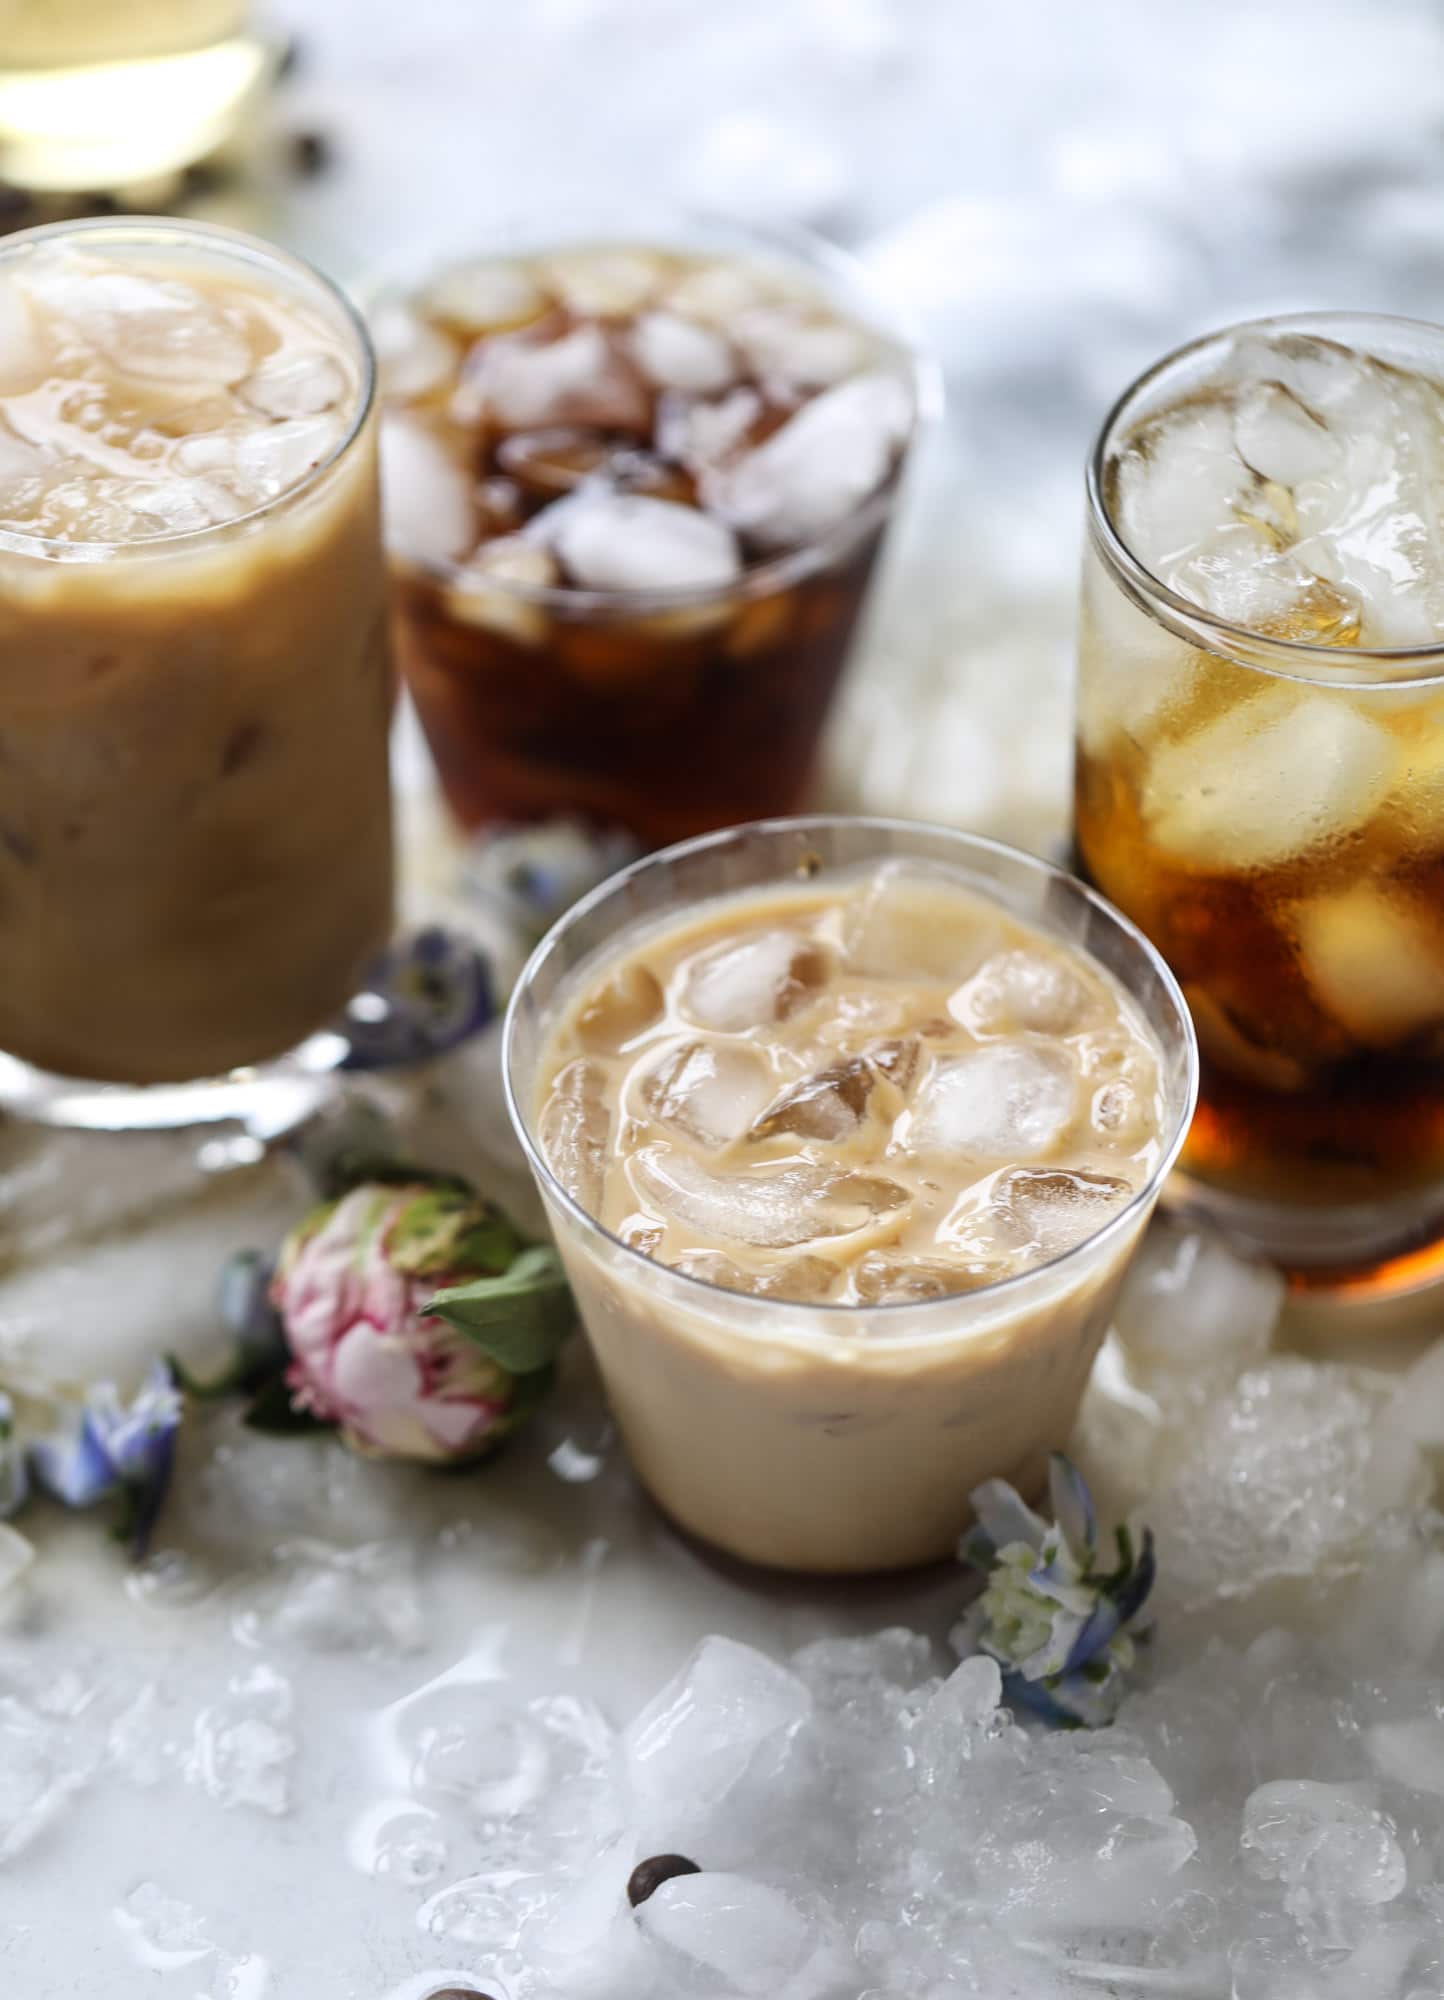 This iced coffee soda is so perfect for summer! Rich coconut syrup, cold brew coffee, cream (or coconut cream!) if you'd like it and lots of bubbly soda. Tastes refreshing, feels like a cocktail and still gives you a pick-me-up! I howsweeteats.com #iced #coffee #soda #coconut